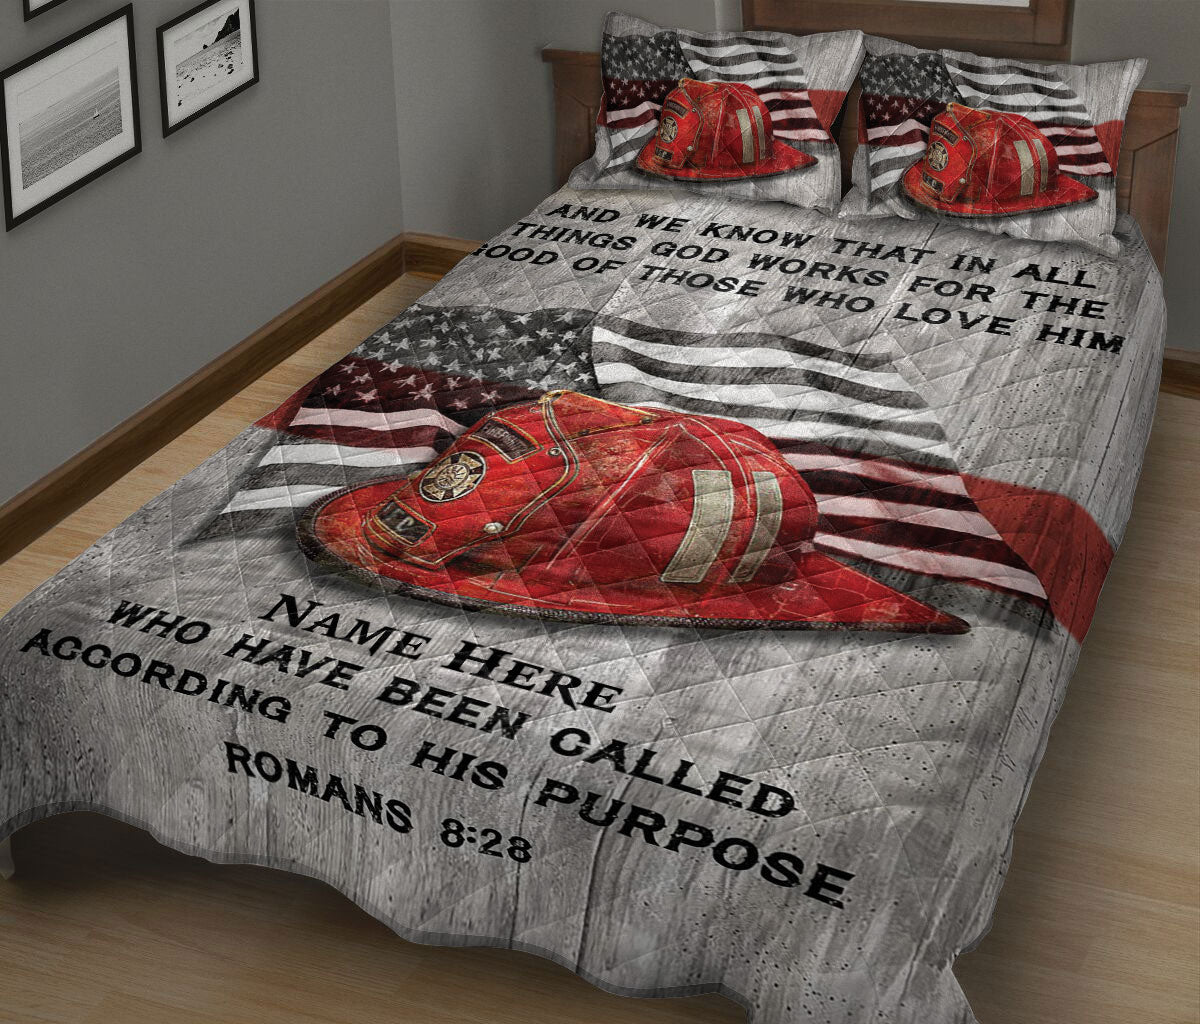 Ohaprints-Quilt-Bed-Set-Pillowcase-Firefighter-Thin-Red-Line-That-In-All-Things-God-Work-Custom-Personalized-Name-Blanket-Bedspread-Bedding-234-King (90'' x 100'')